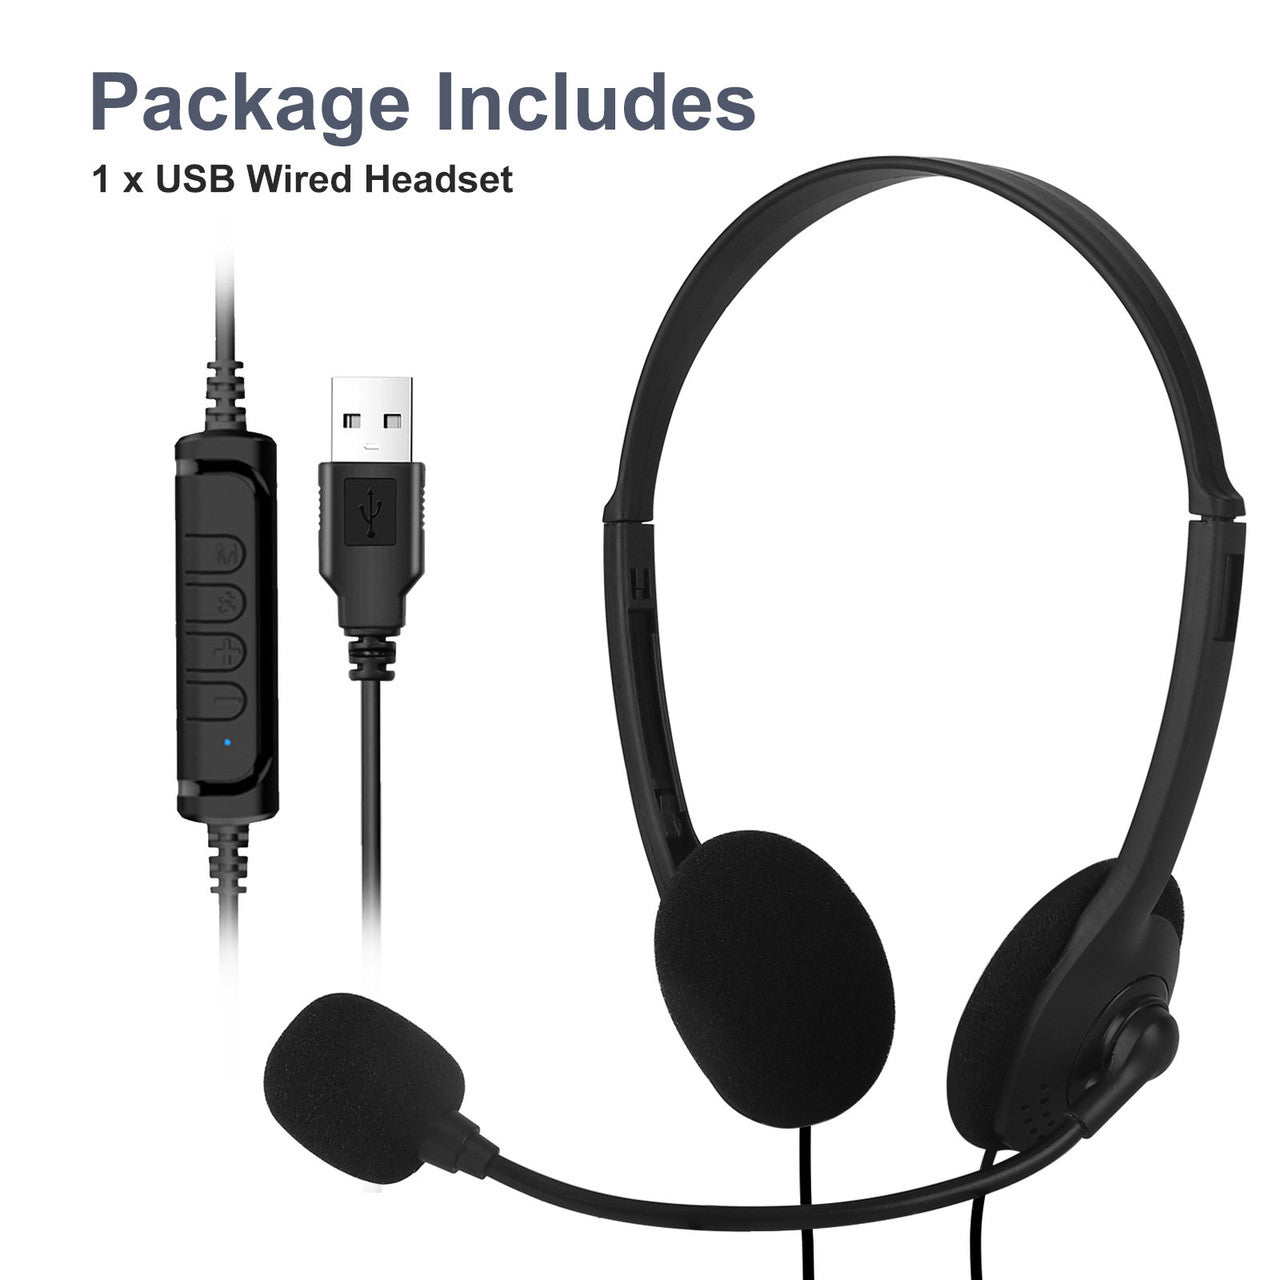 USB Wired Headset with Microphone for Gaming, Chat and More